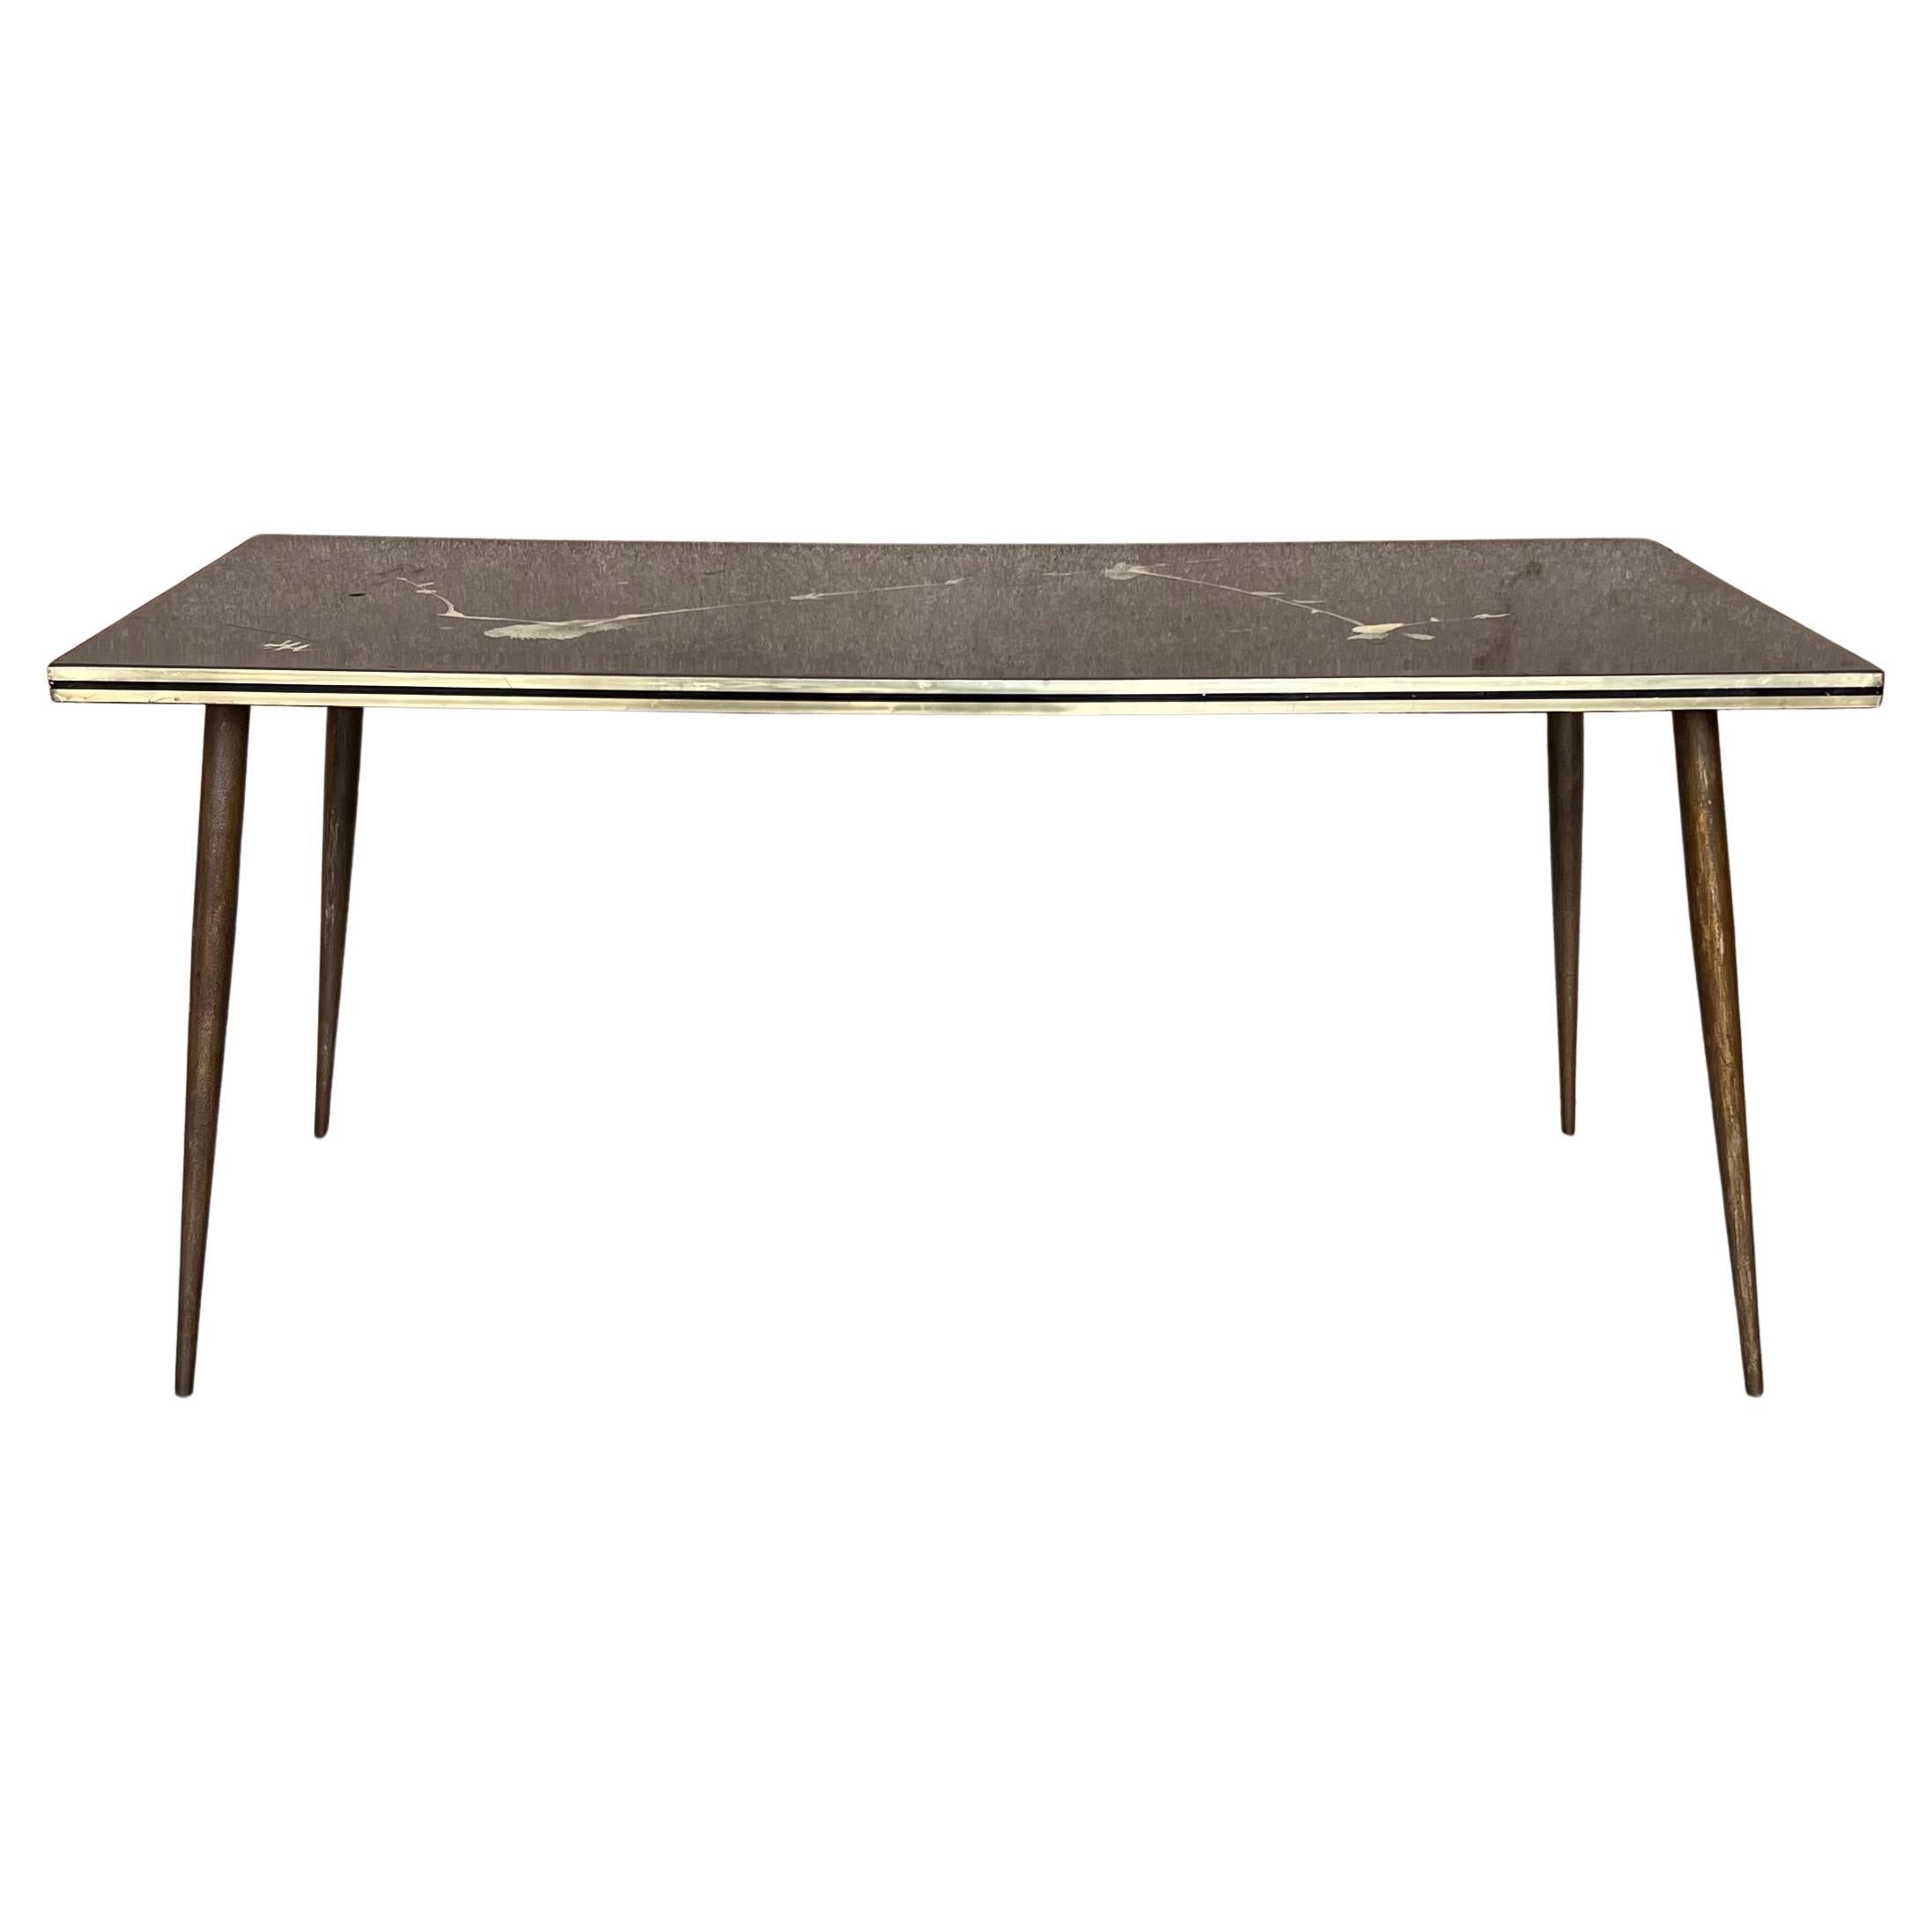 Italian Mid-Century Modern Black & Gold Coffee Table with Abstract Painting Top